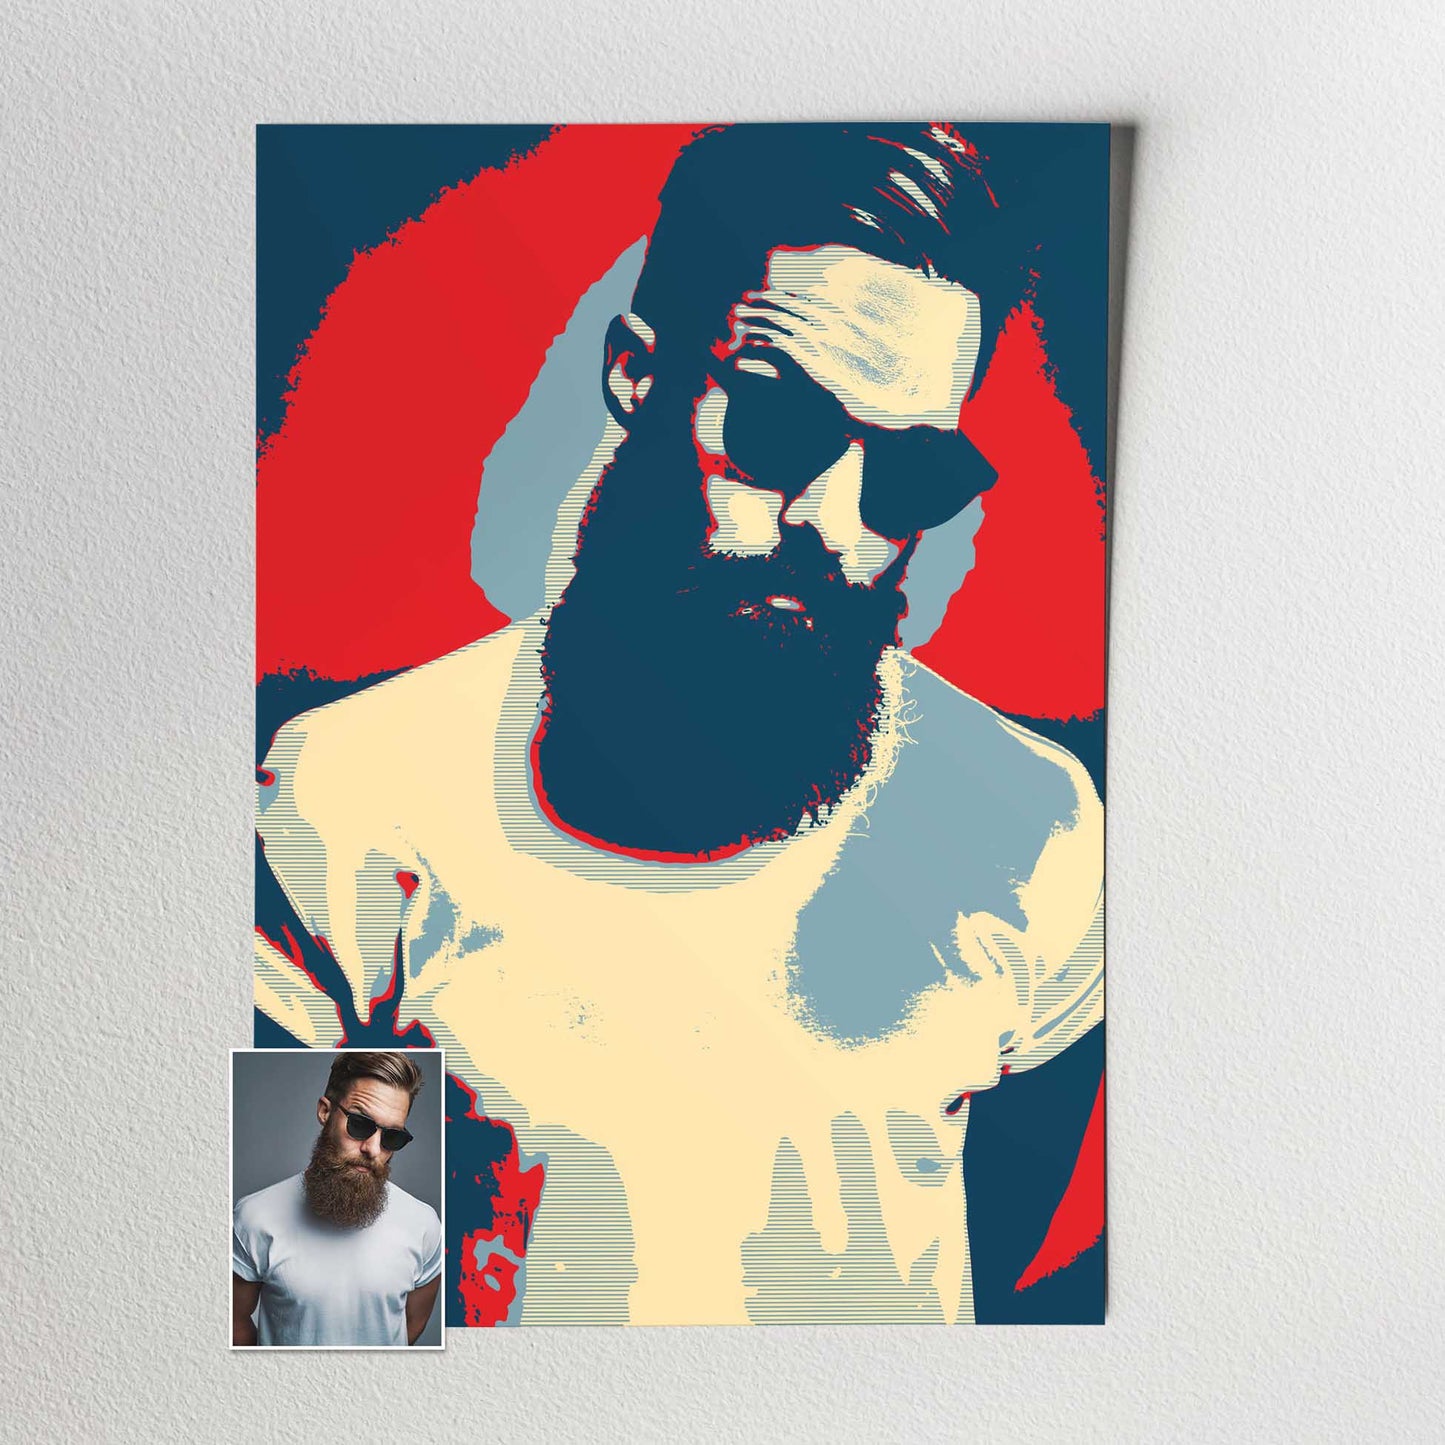 Elevate your space with our Personalised Election Poster Print, created from your photo in a captivating pop art style. The vivid red, blue, and beige hues add a sharp and edgy touch to the design, making it vibrant and iconic